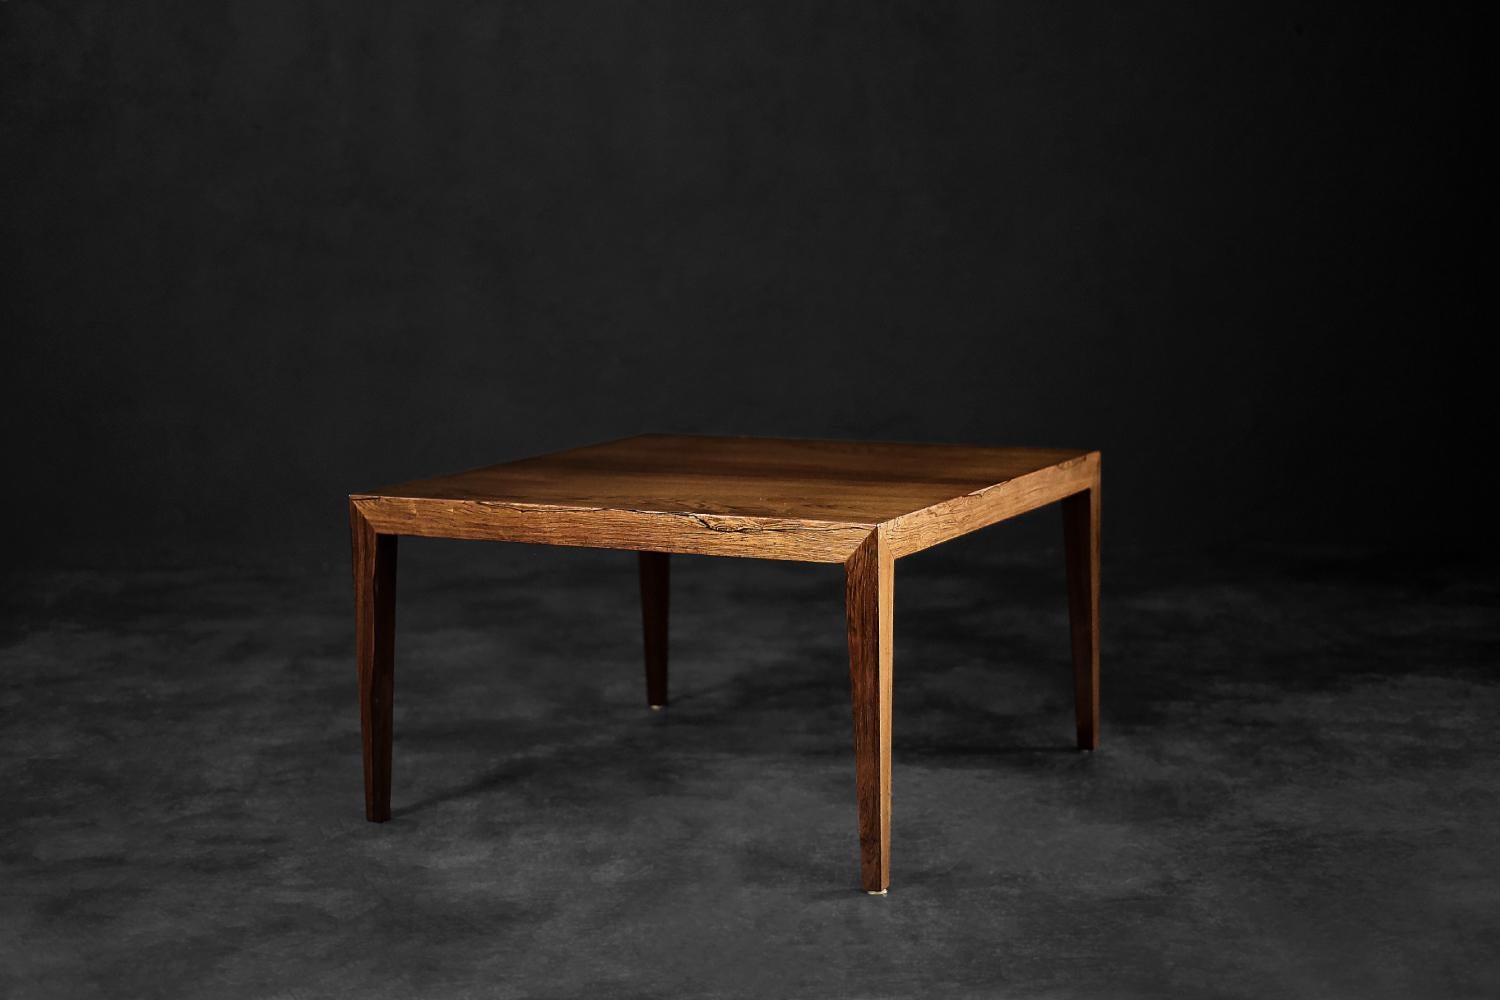 This classic coffee table was designed during the 1960s by Severin Hansen for the Danish manufacturer Haslev Møbelsnedskeri. The geometric table is made of precious rosewood in a warm shade of brown. Characteristic for Hansen, the angular connection